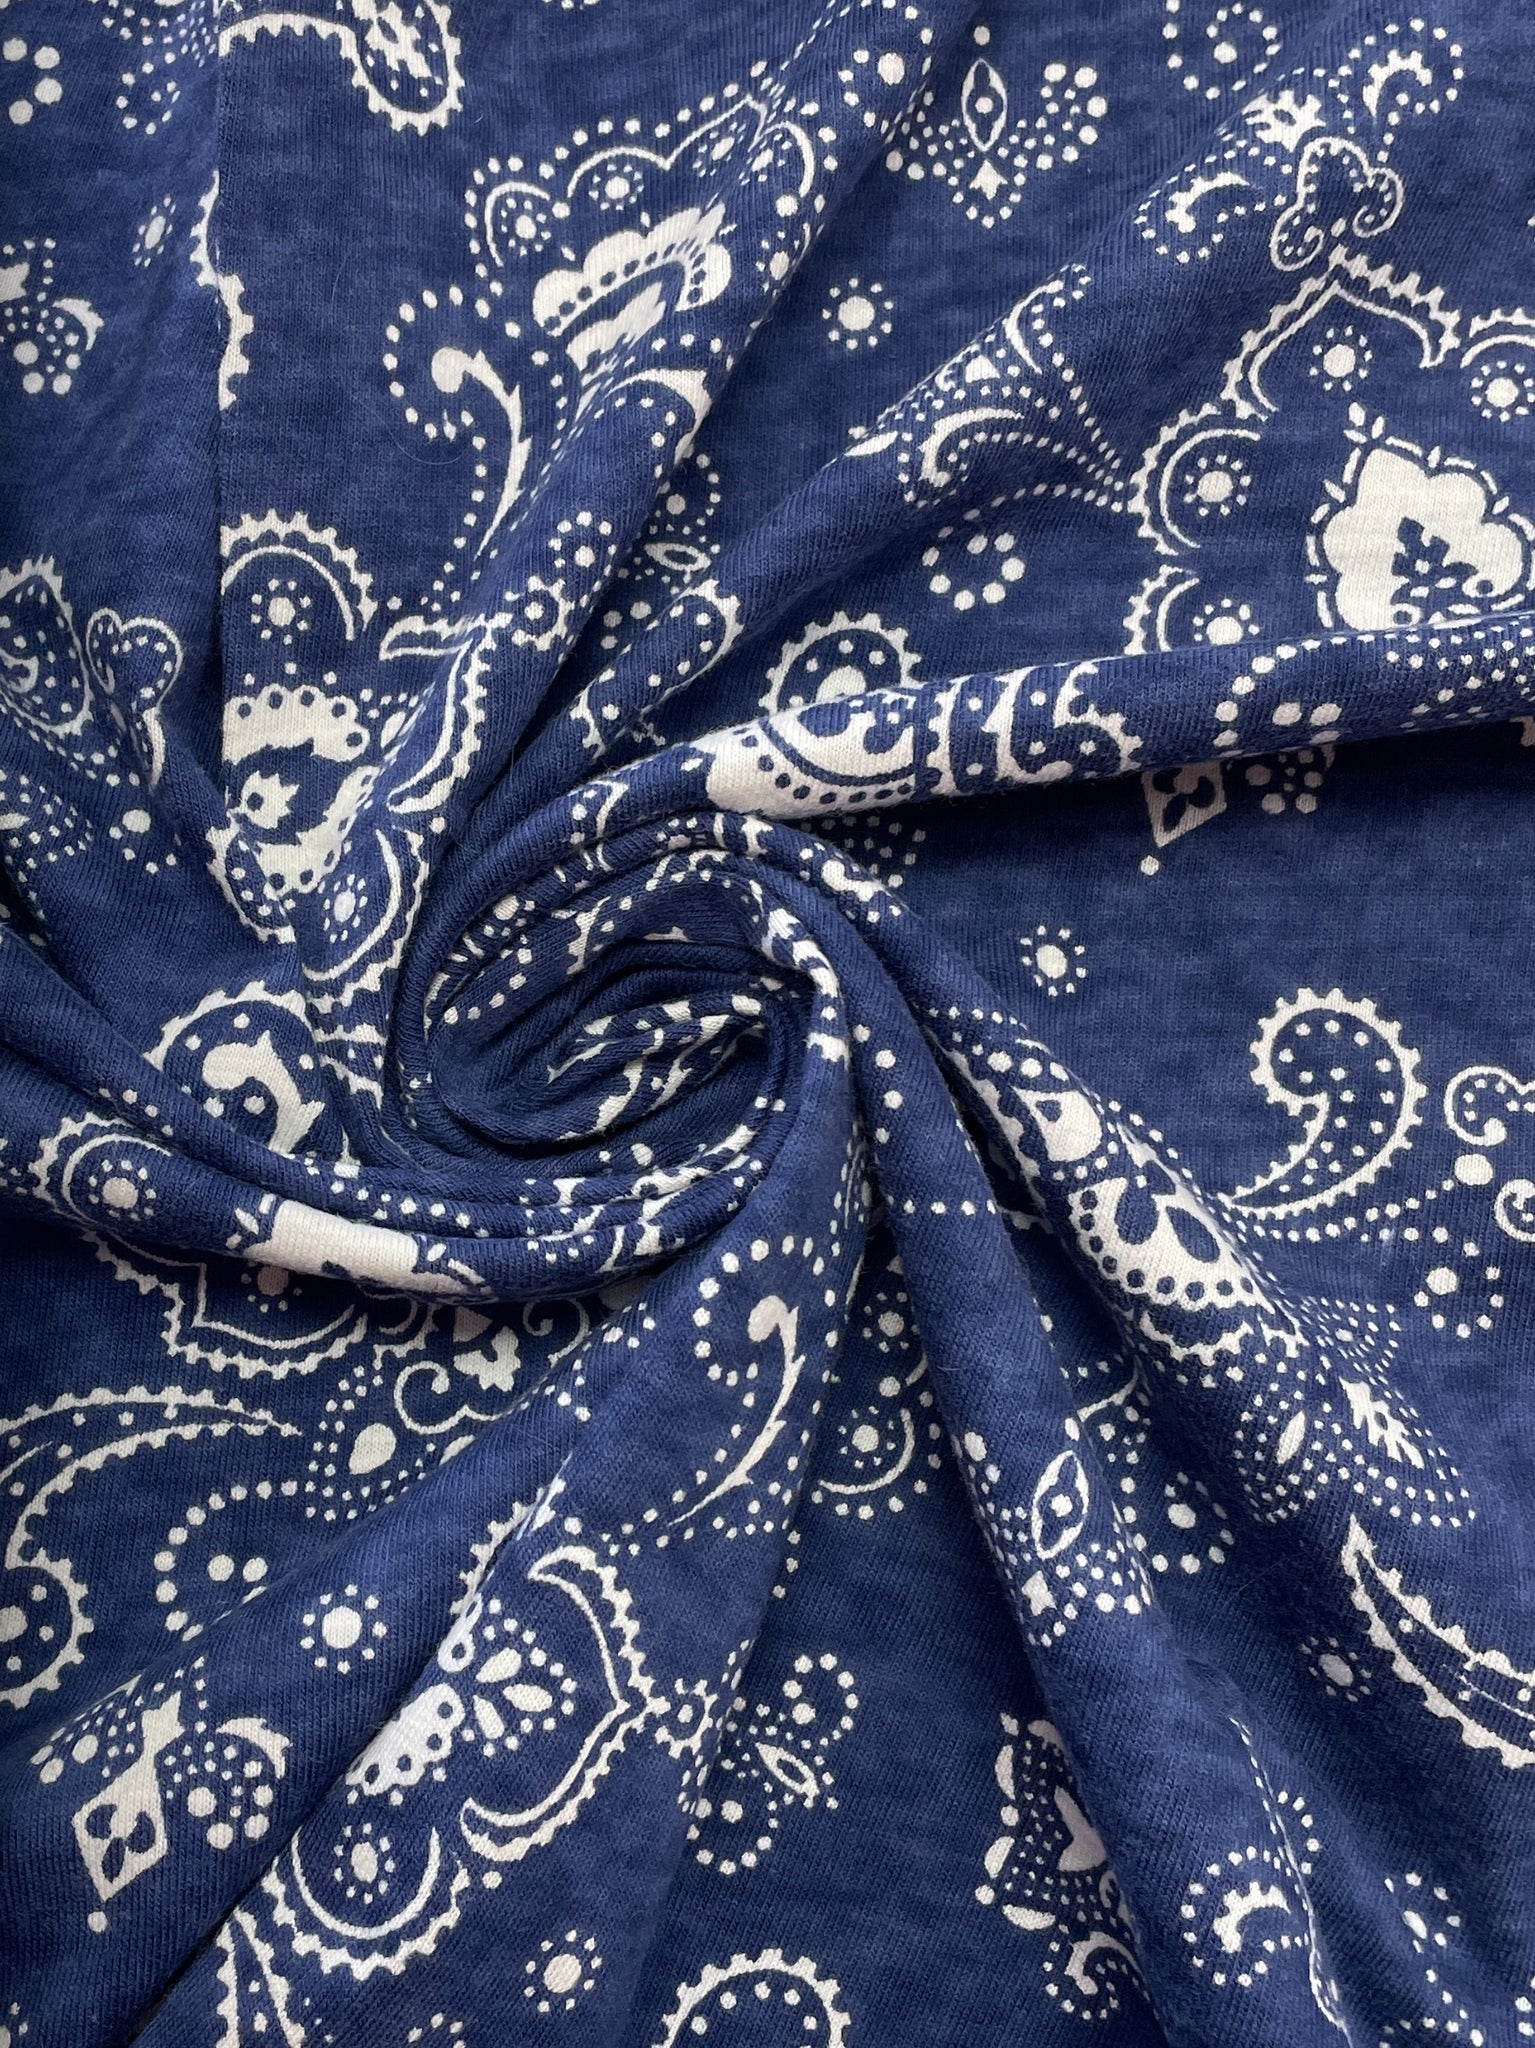 3/4 YD Cotton Knit Remnant - Heather Blue with White Paisley